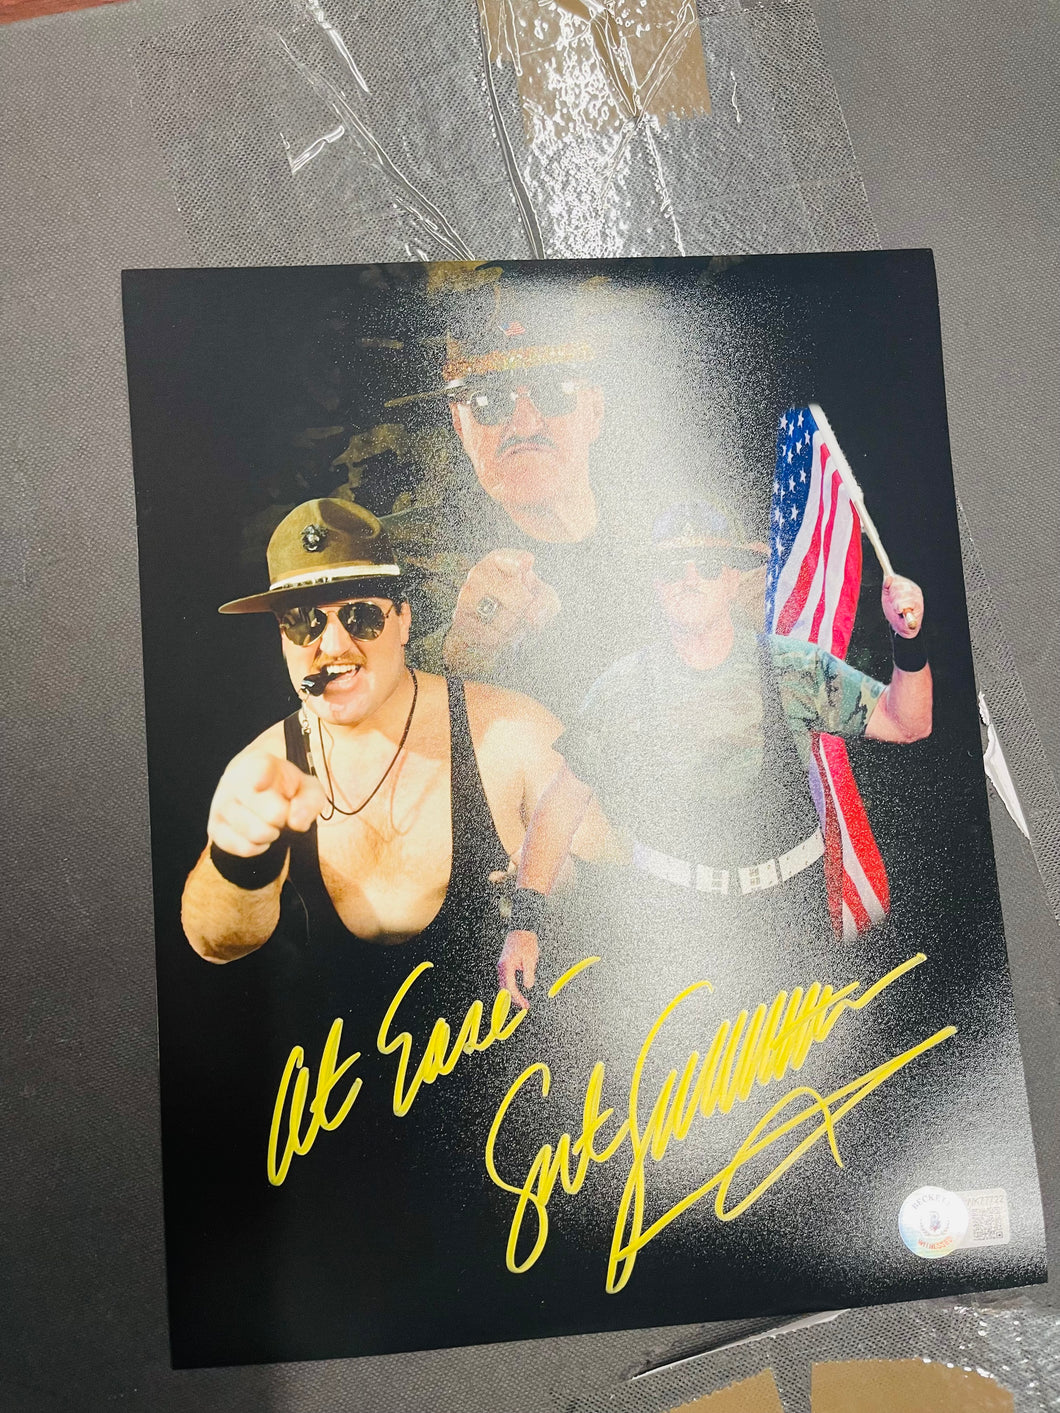 Sgt Slaughter 8x10 photo